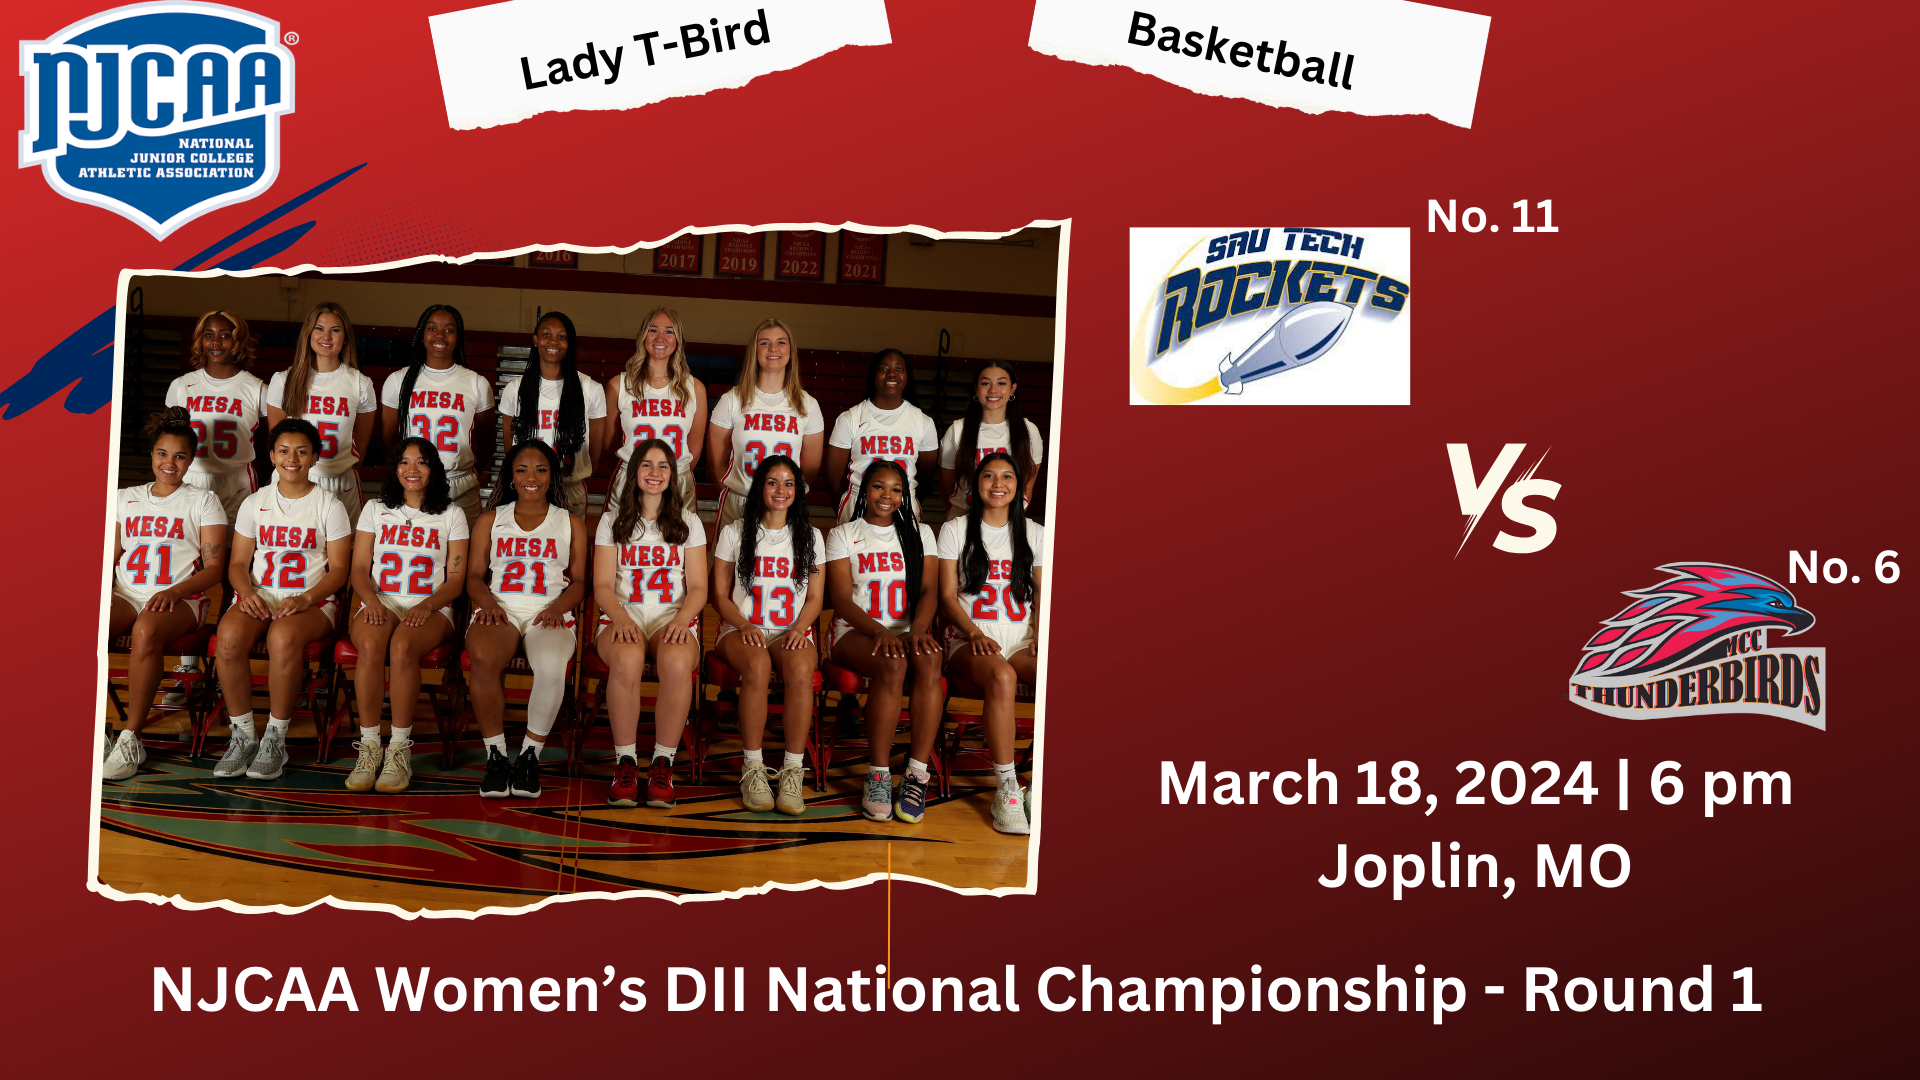 No. 6 Women's Basketball takes on No. 11 SAU Tech in first round of NJCAA National Championship on Monday